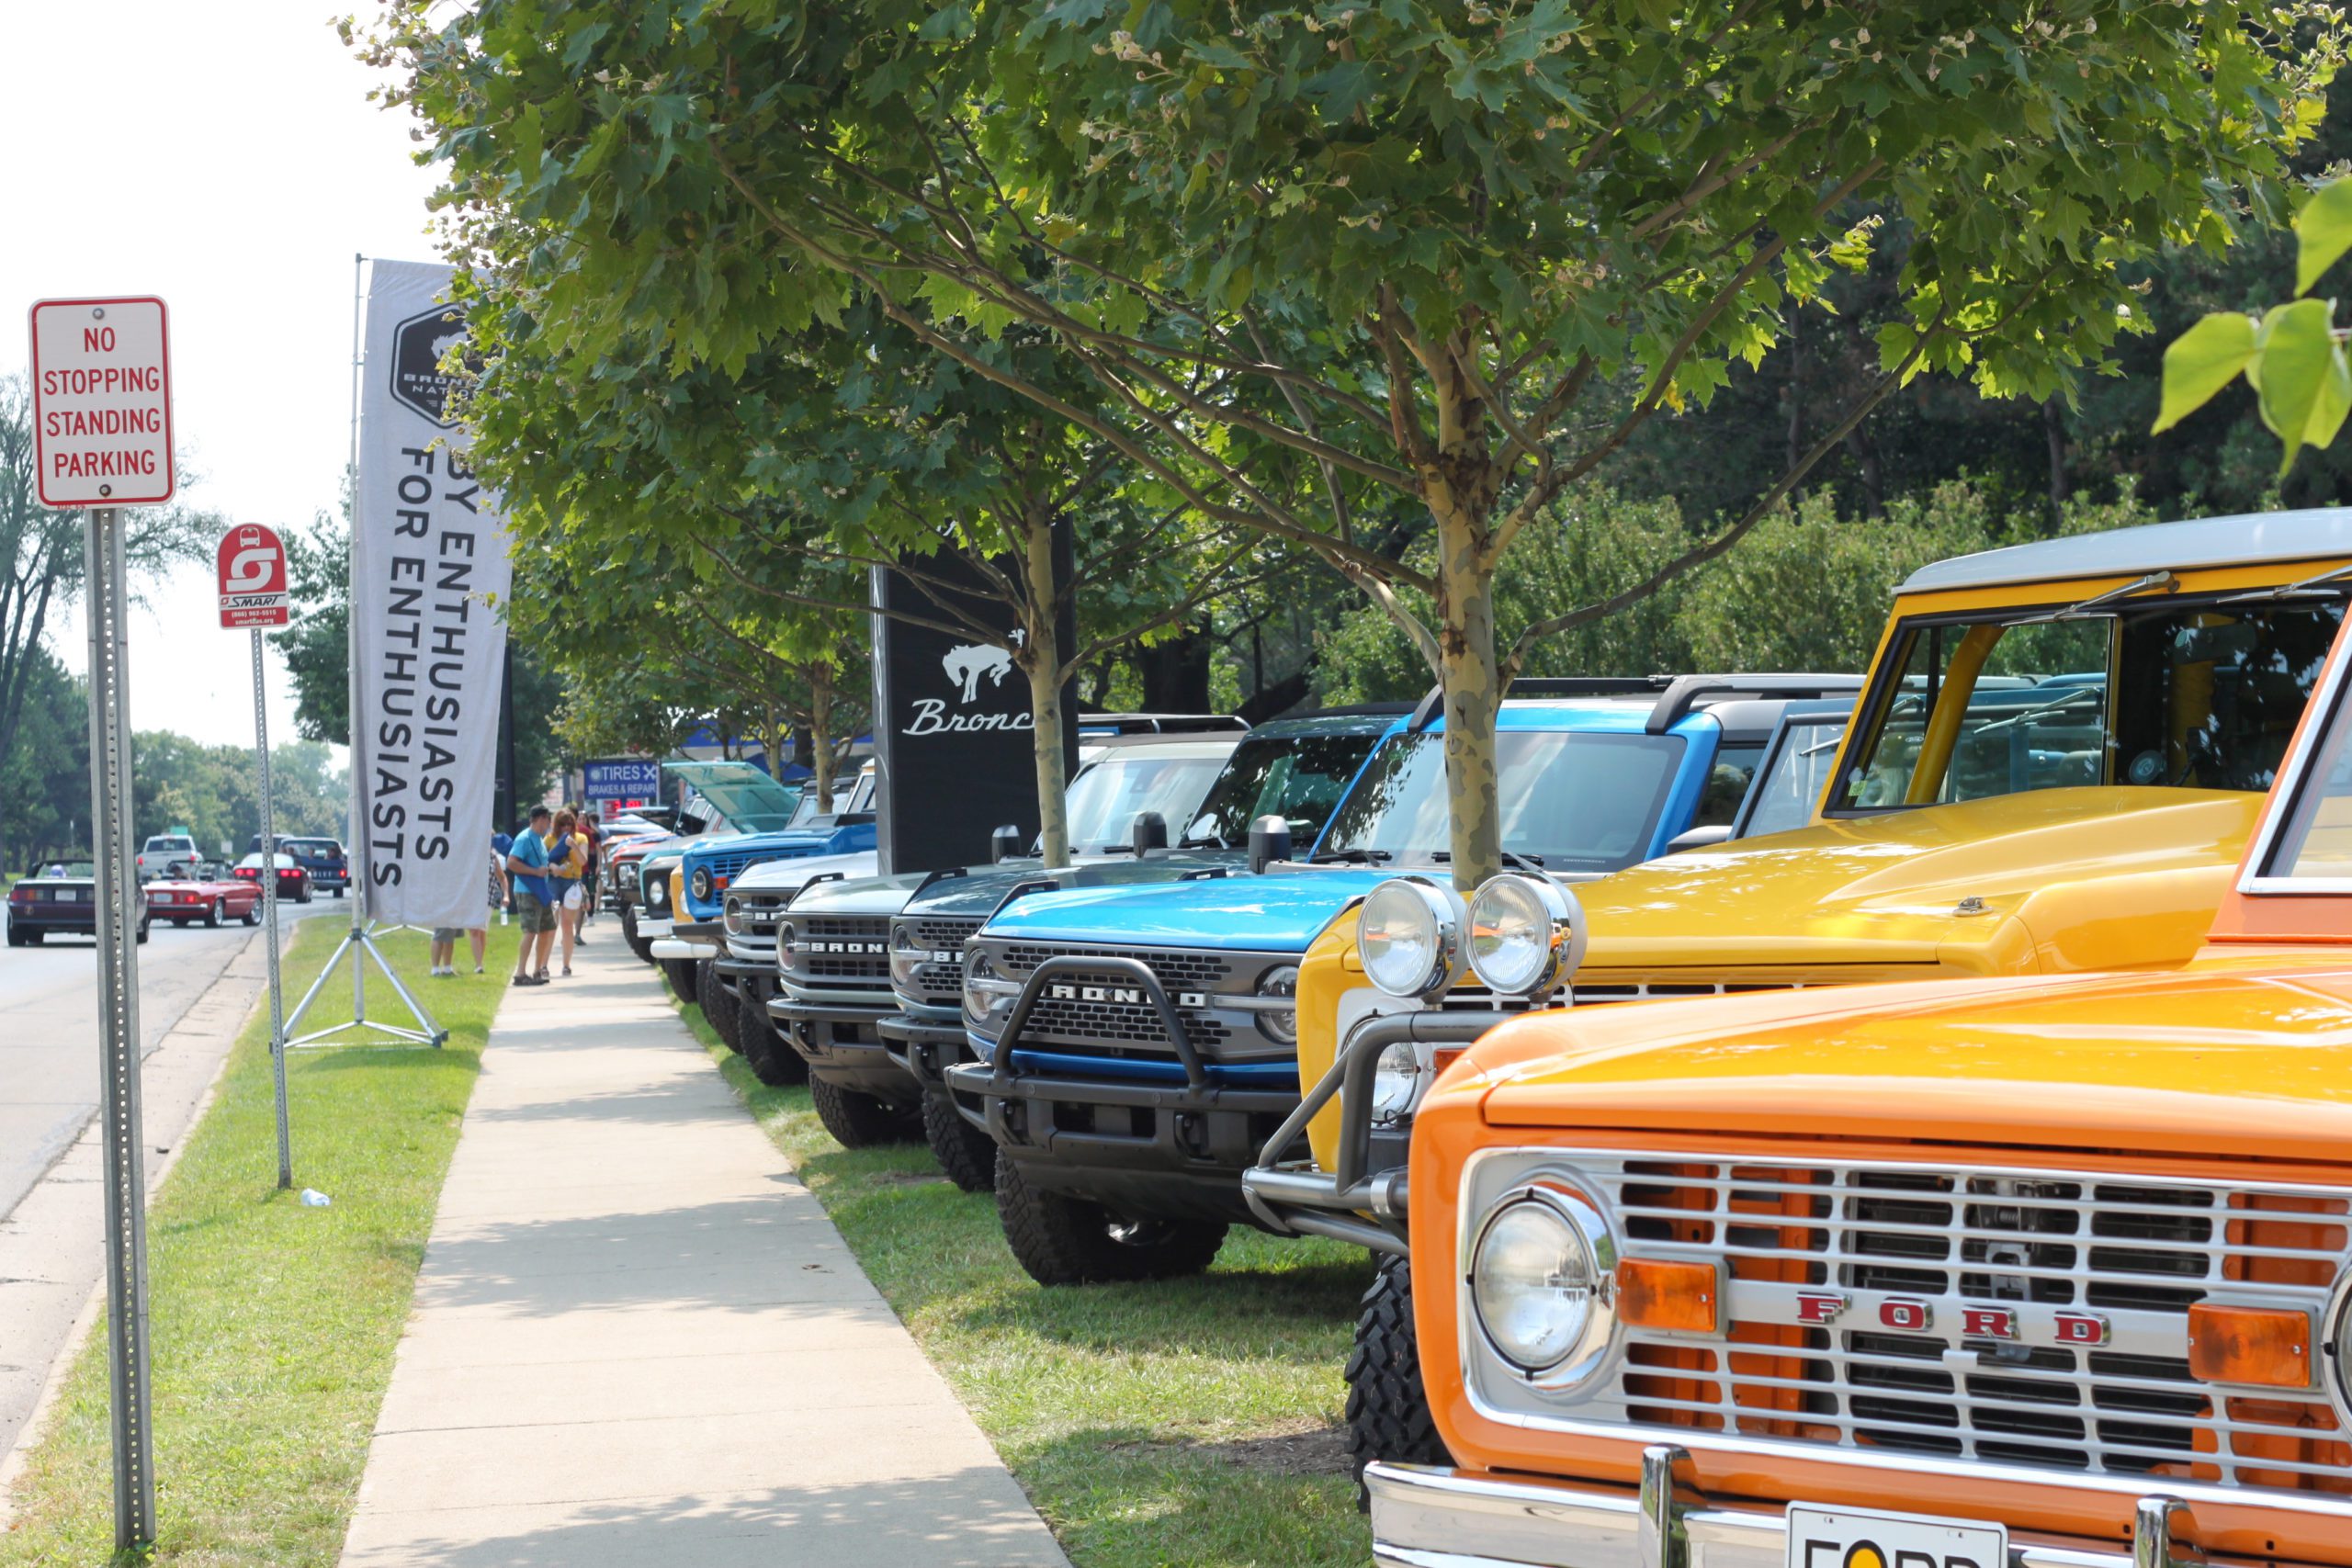 The Woodward Dream Cruise is a blast, but with all that walking and time in the sun comes the need to refuel and recharge. These food and drink spots can help.